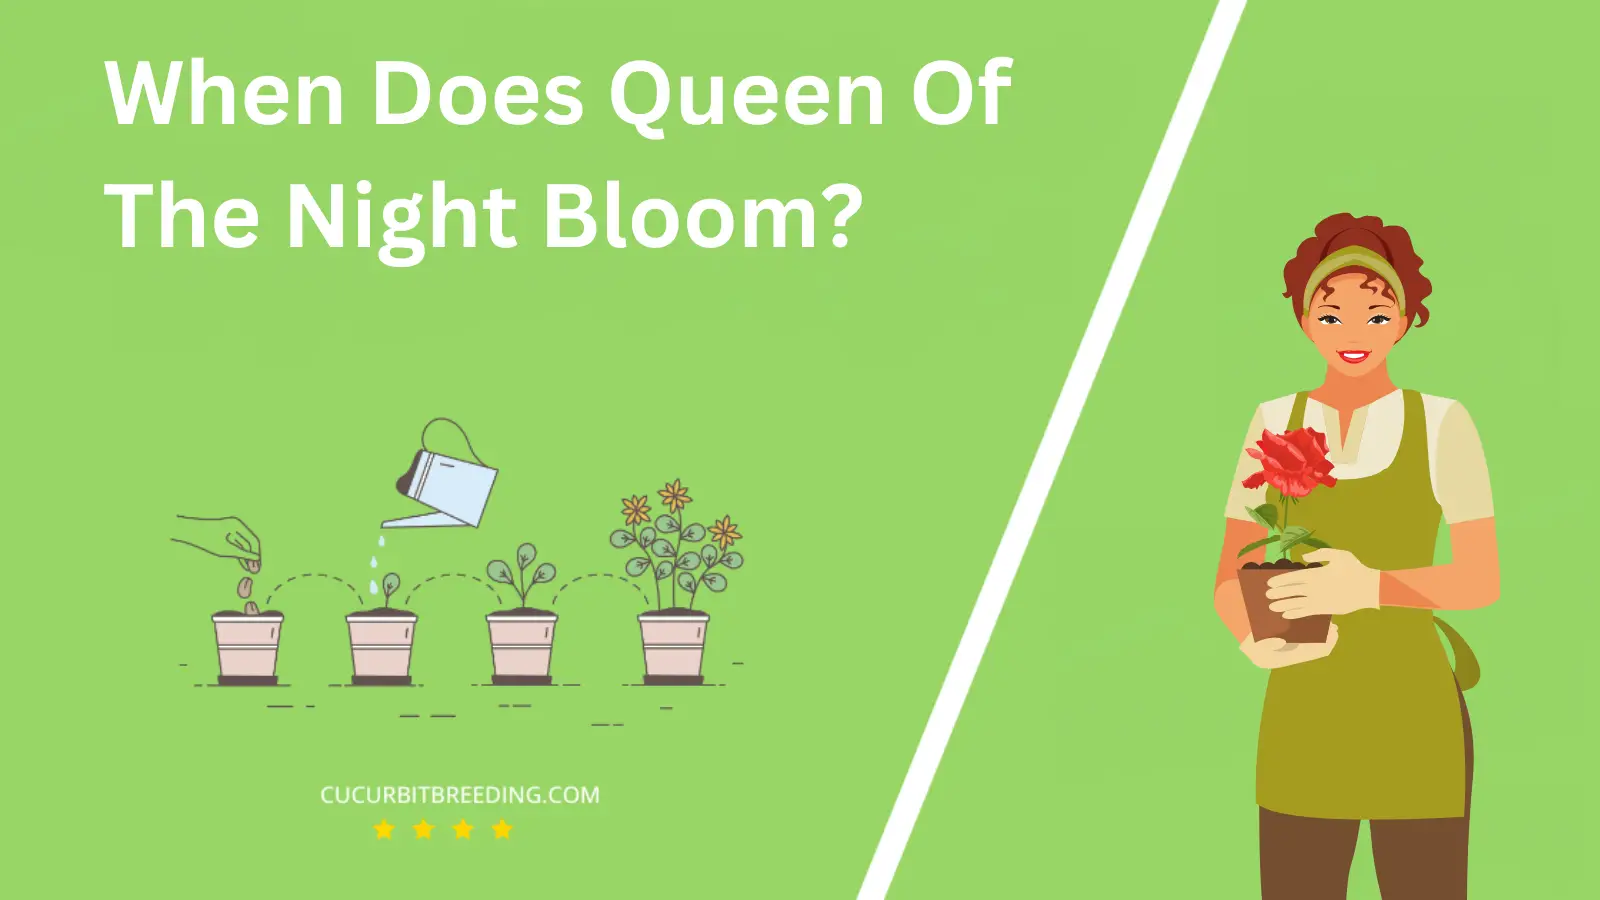 When Does Queen Of The Night Bloom?